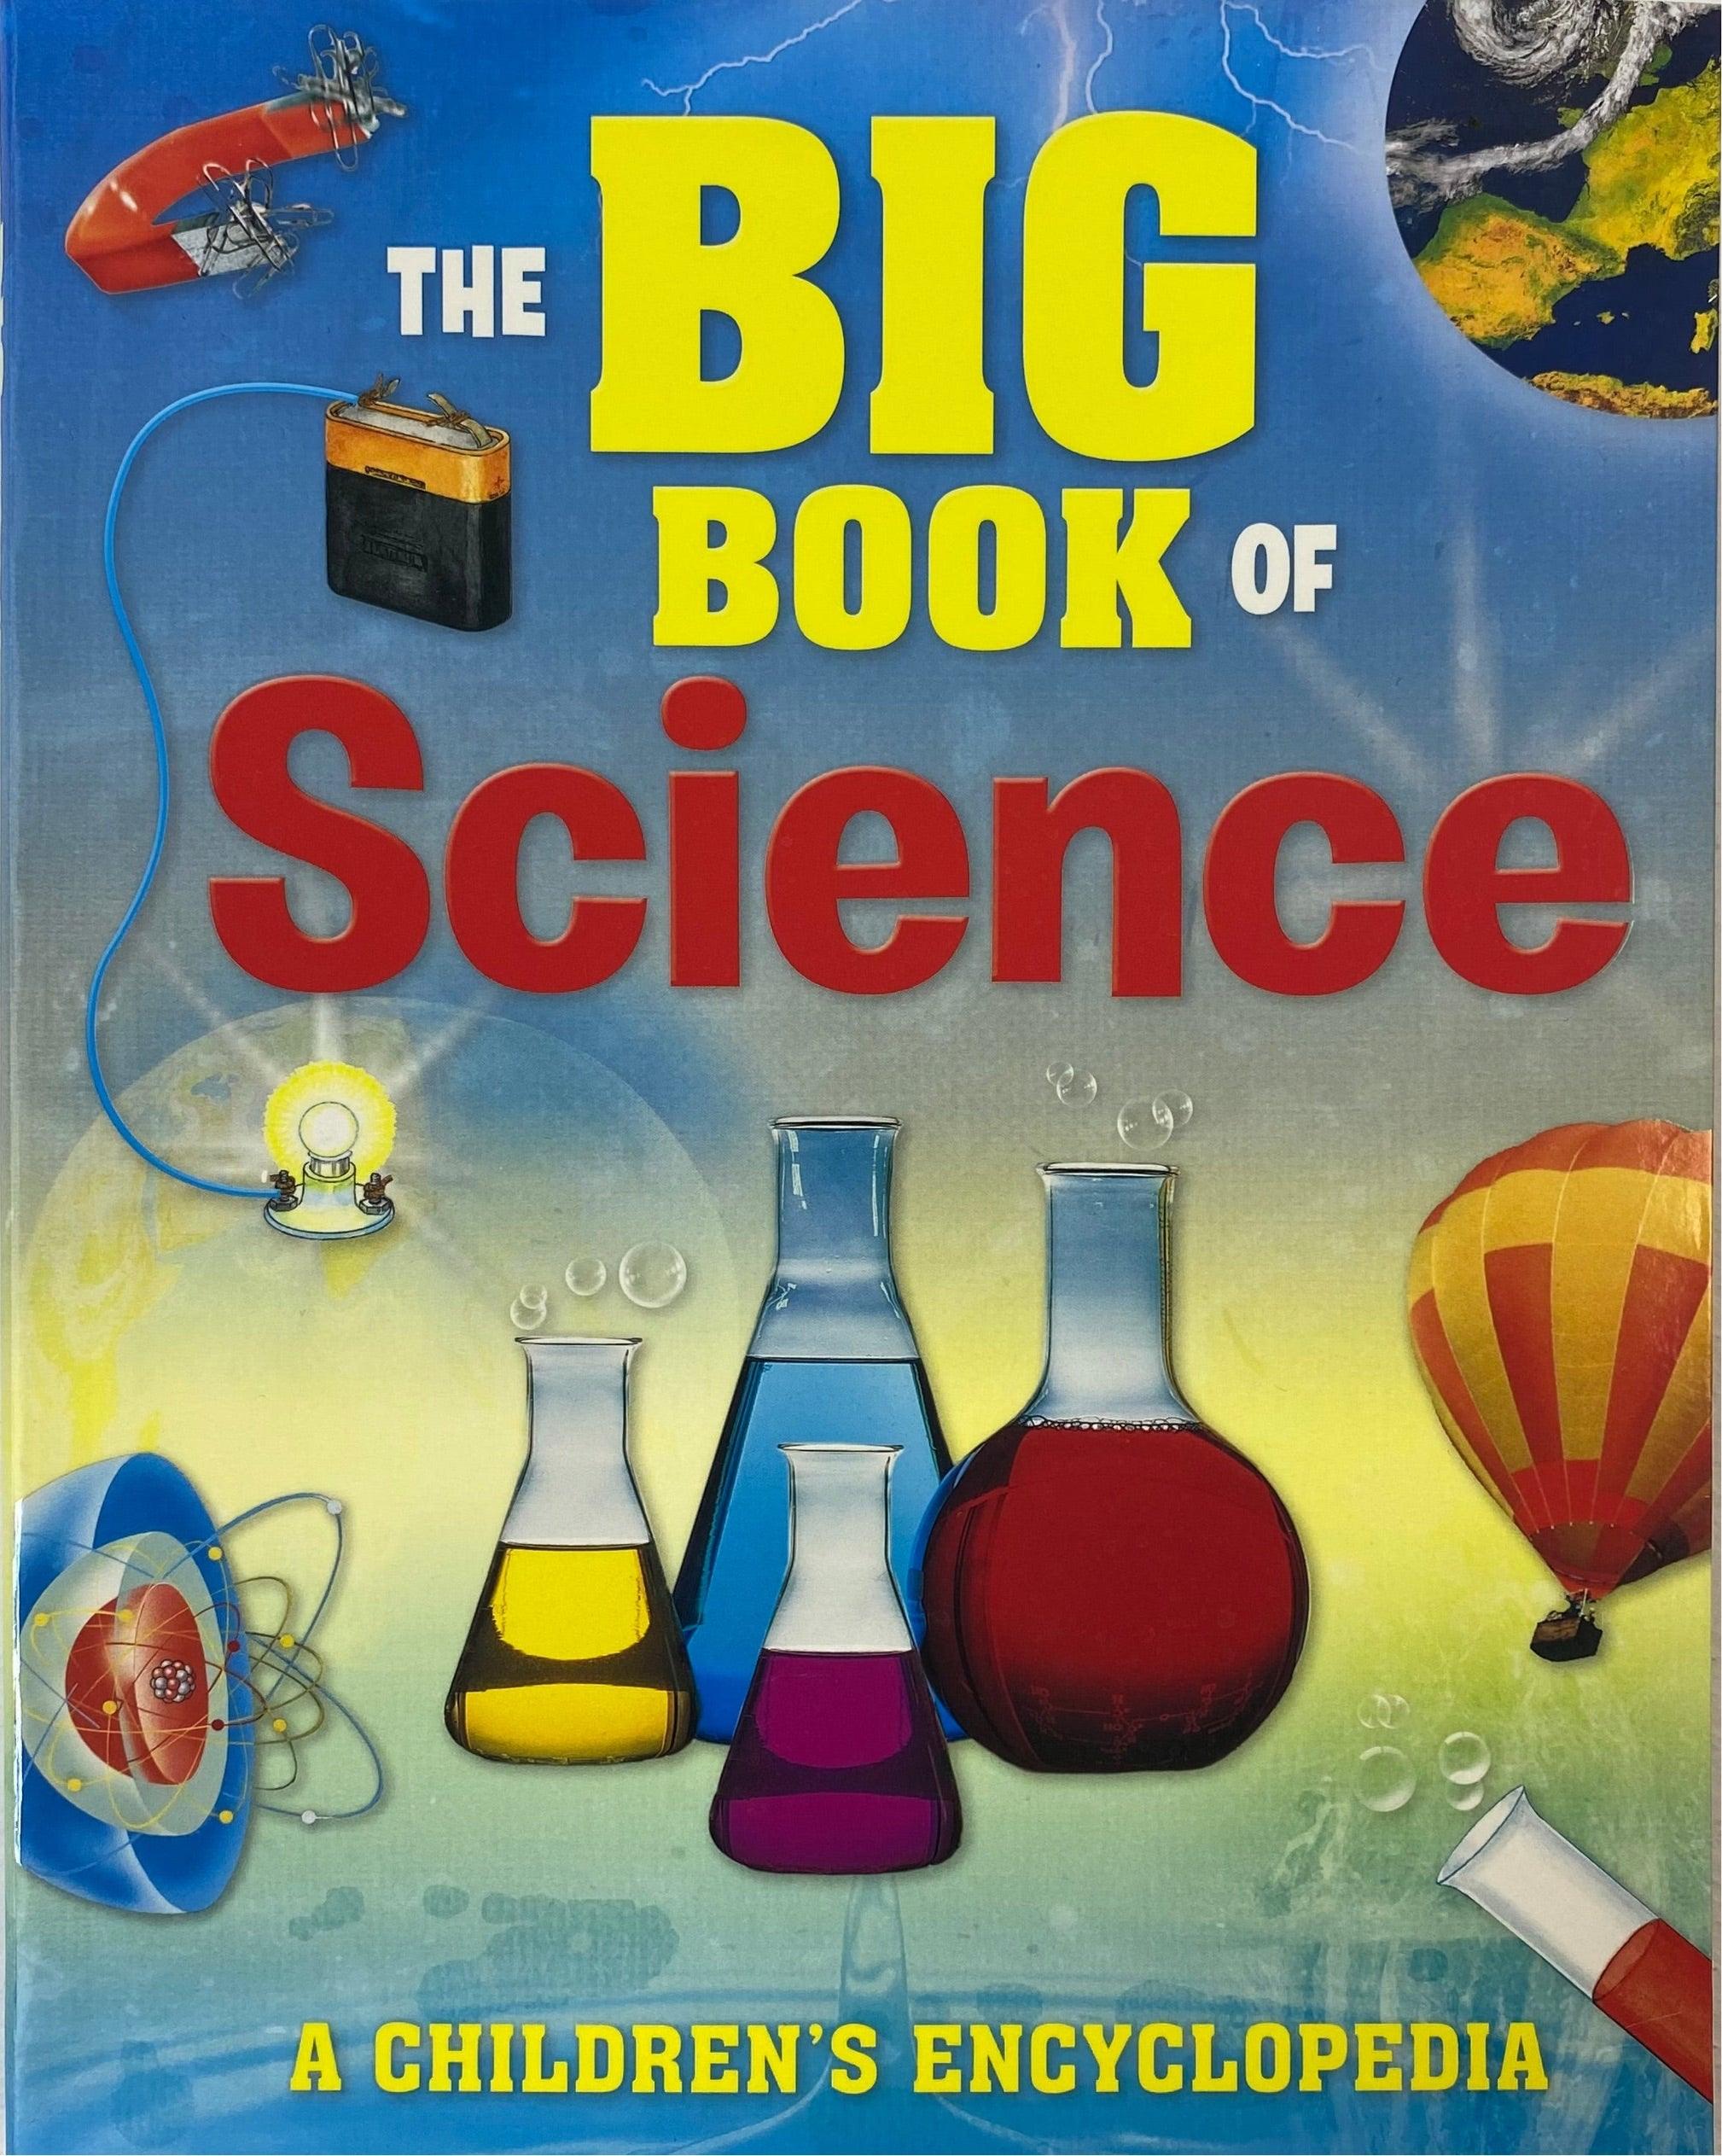 Encyclopedia　Science　Book　Children's　of　The　A　Big　(New)